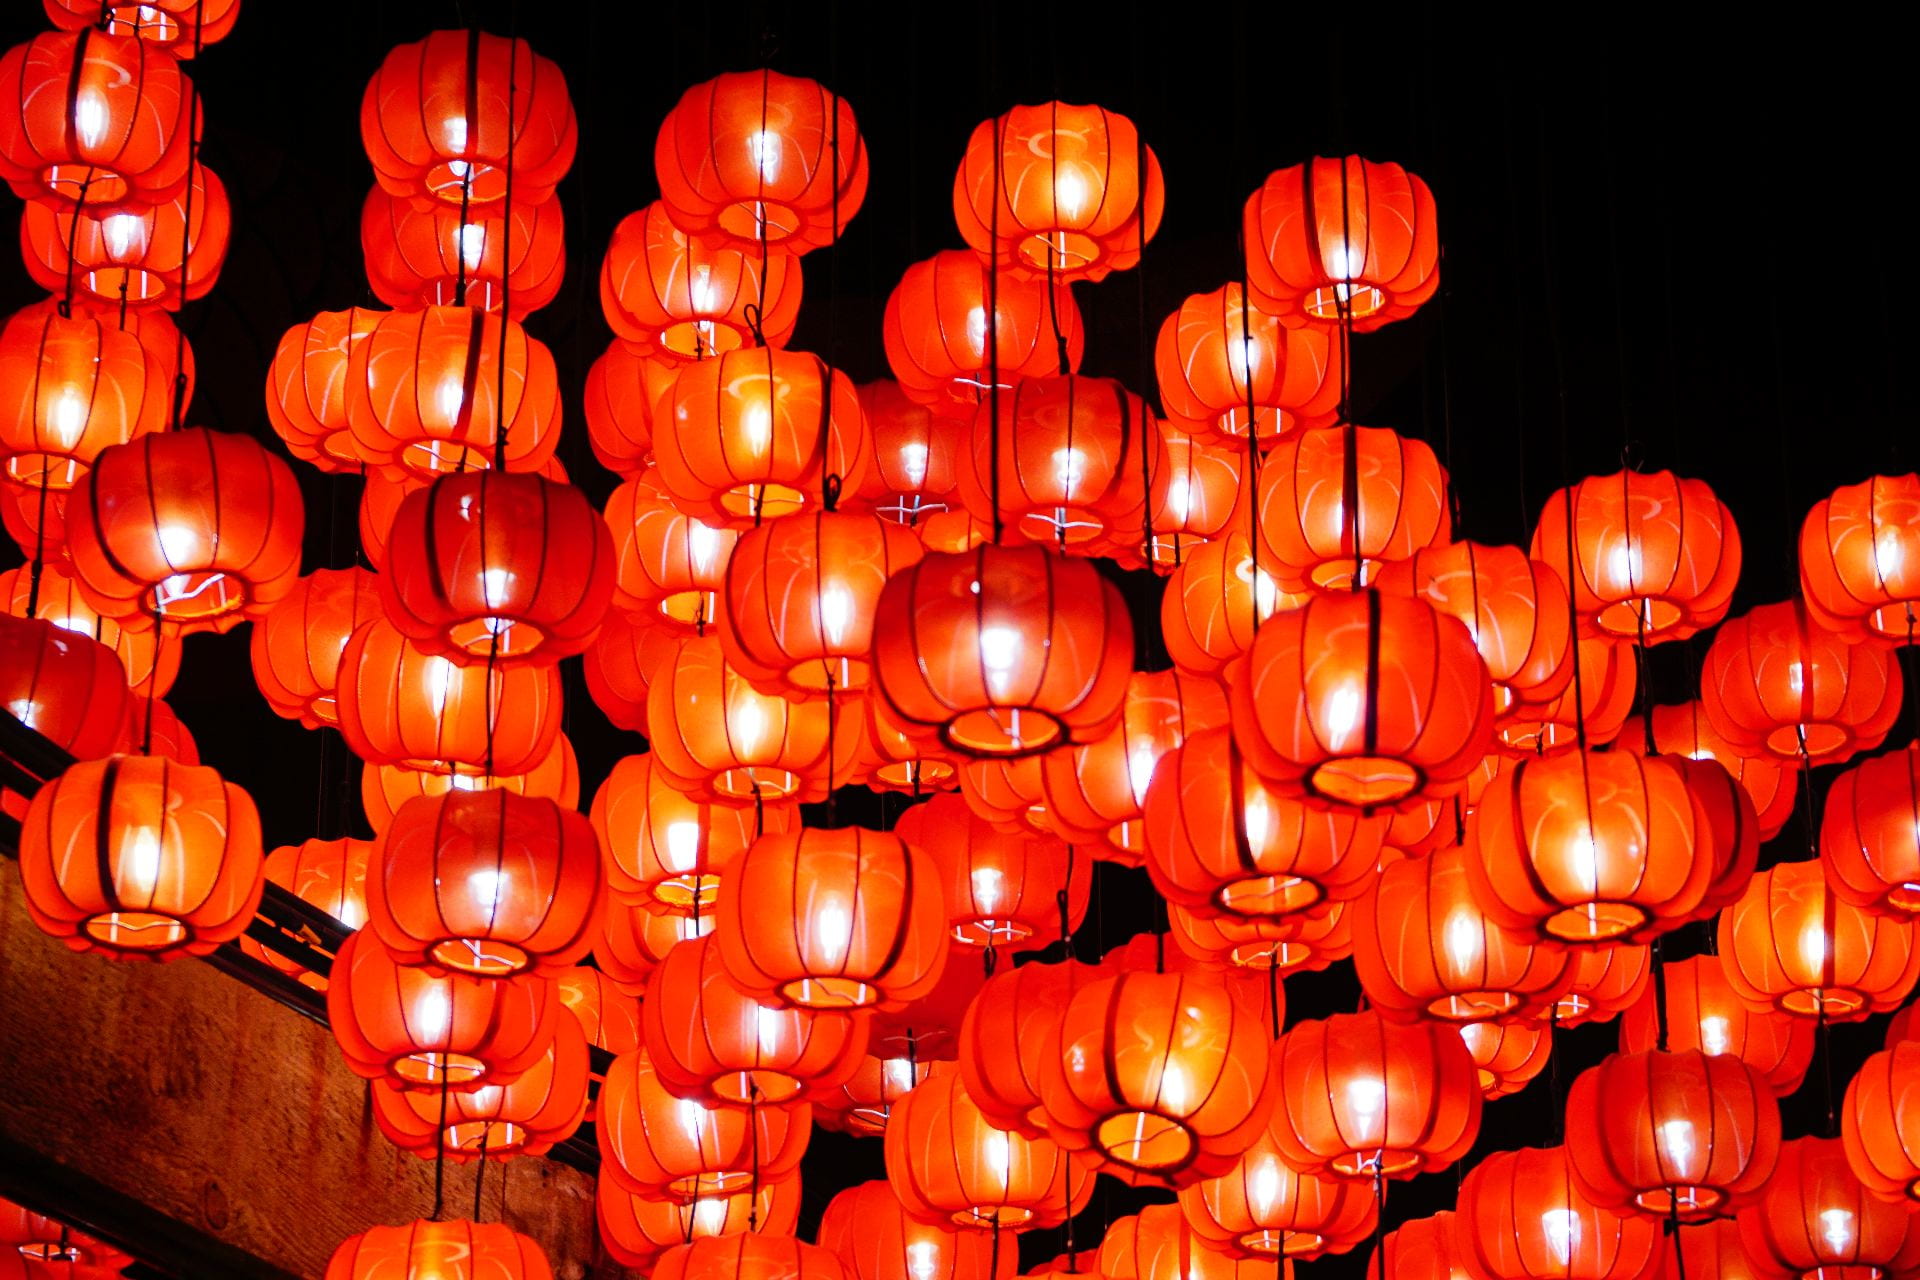 Chinese New Year Celebrations with Lanterns in Singapore, attribution: Dileep Kaluaratchie on Wikimedia Commons